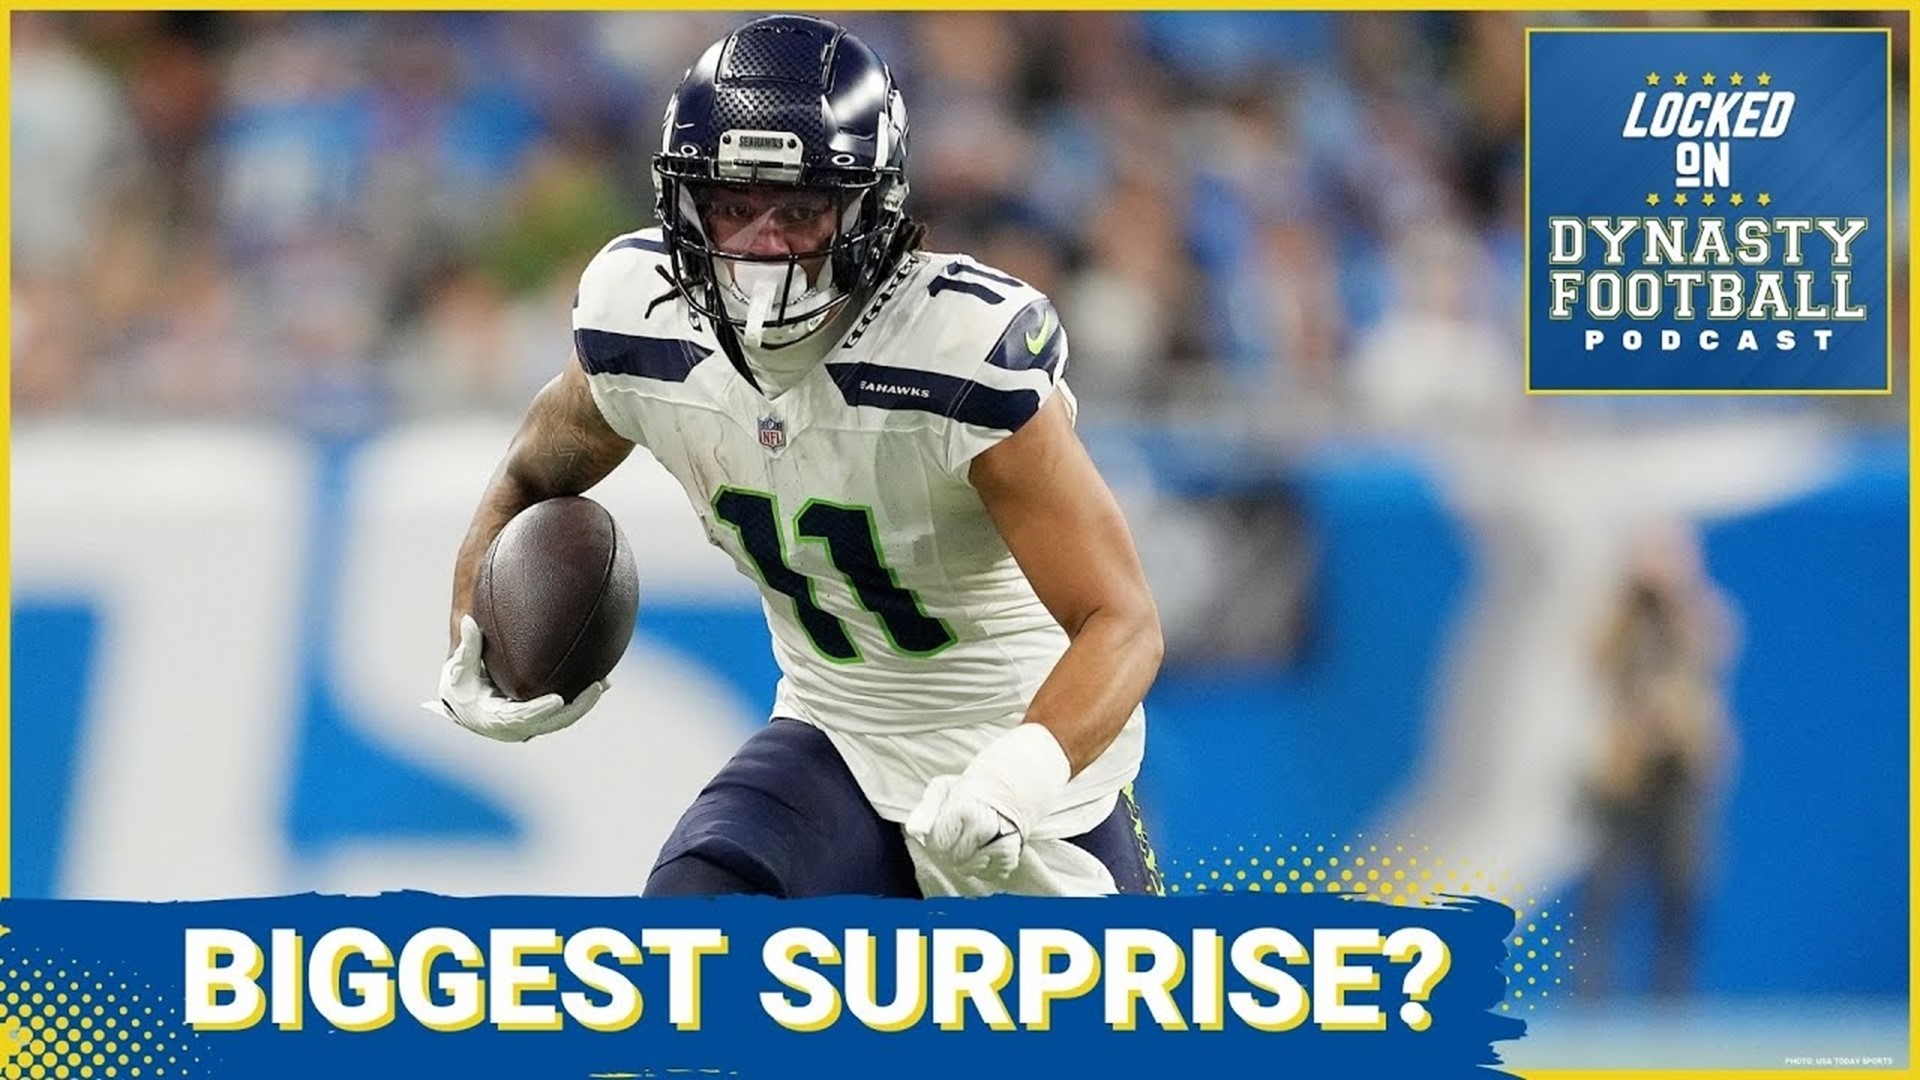 Which NFL rookies have been the biggest surprises in the NFL in a negative way this year?Will Seattle Seahawks WR Jaxon Smith-Njigba find a way to have a bigger role